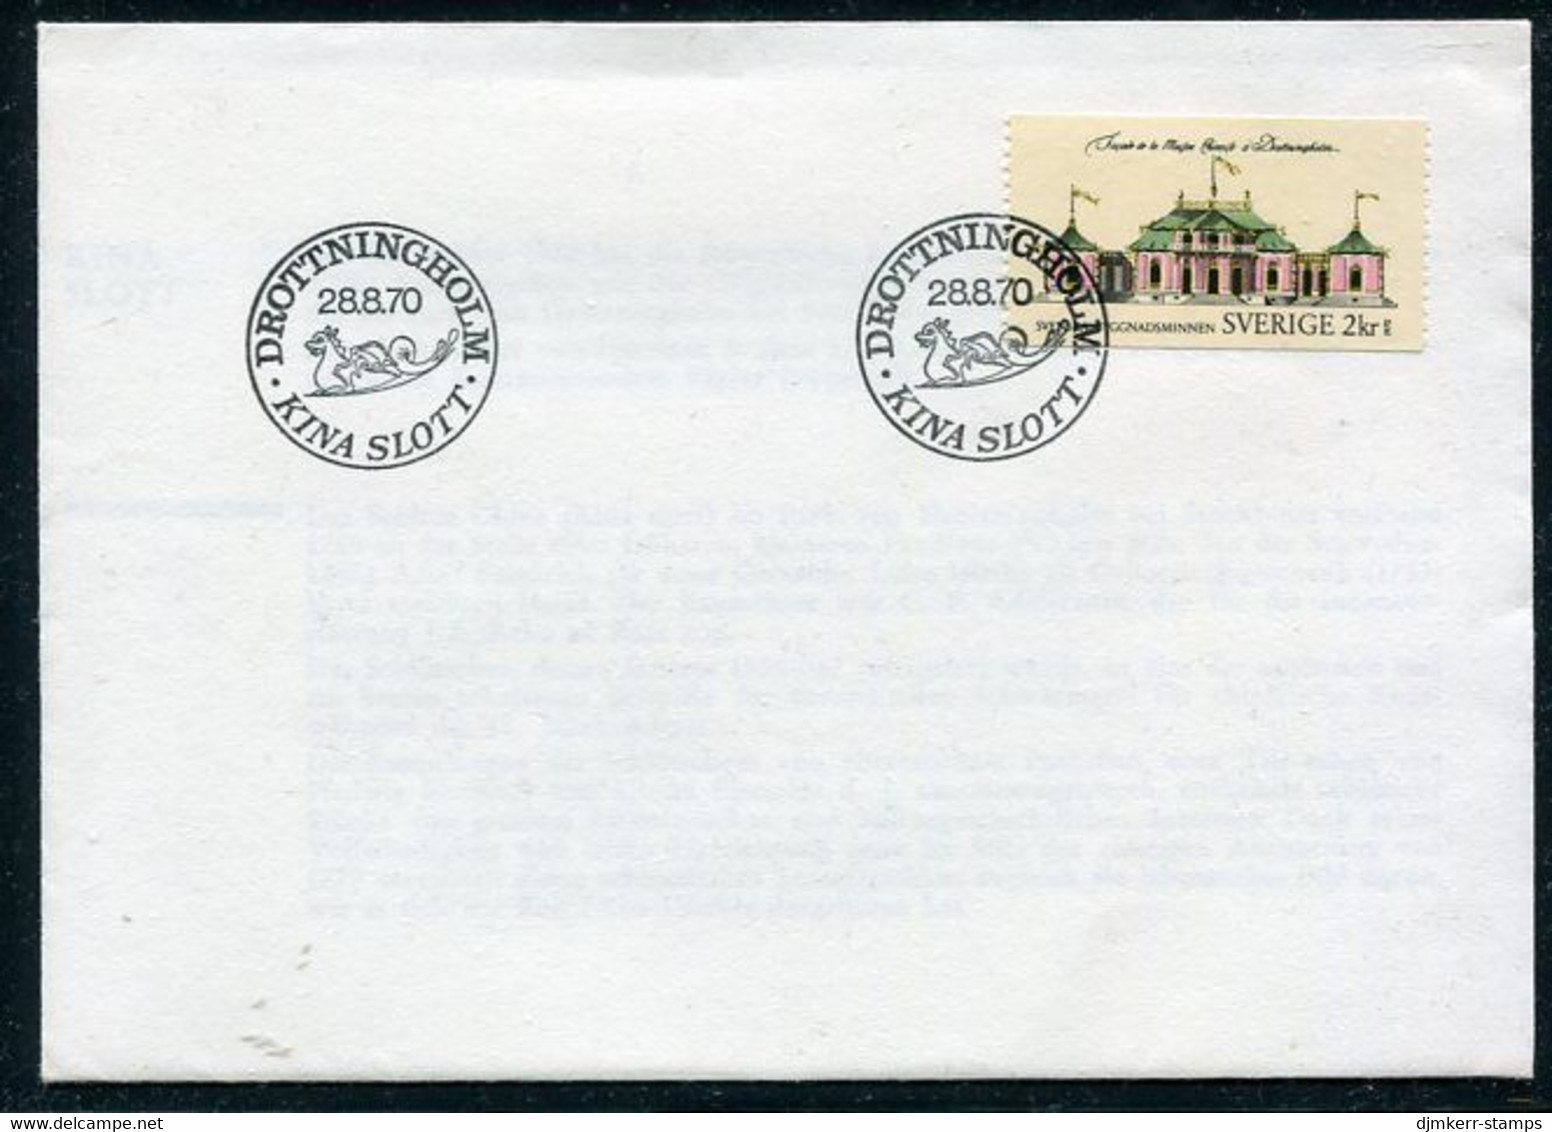 SWEDEN 1970 China Palace FDC.  Michel 682 - FDC